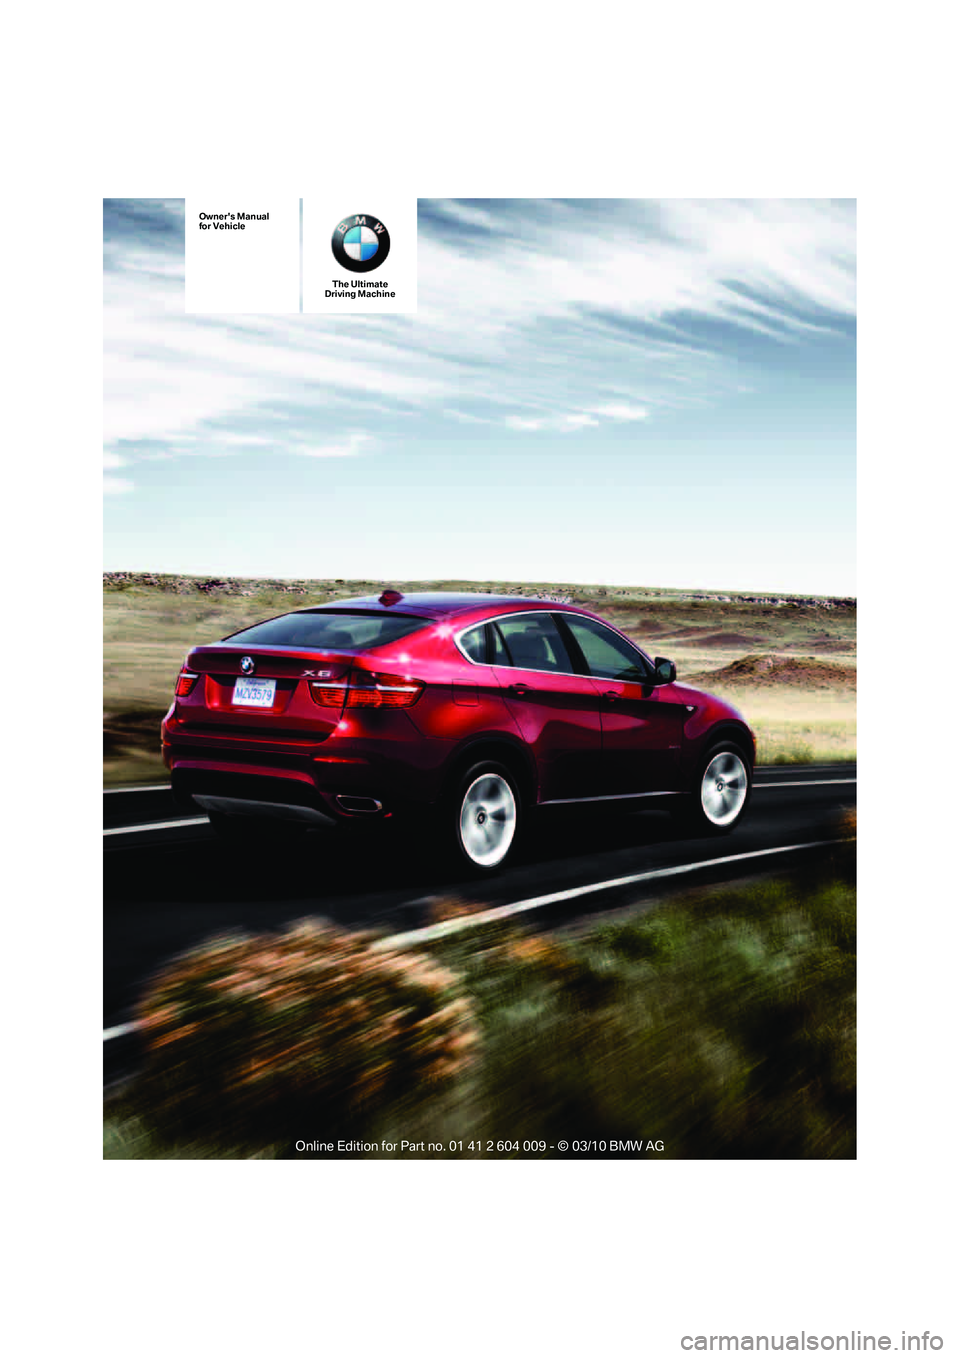 BMW X6 XDRIVE 50I 2011  Owners Manual The Ultimate
Driving Machine
Owners Manual
for Vehicle 